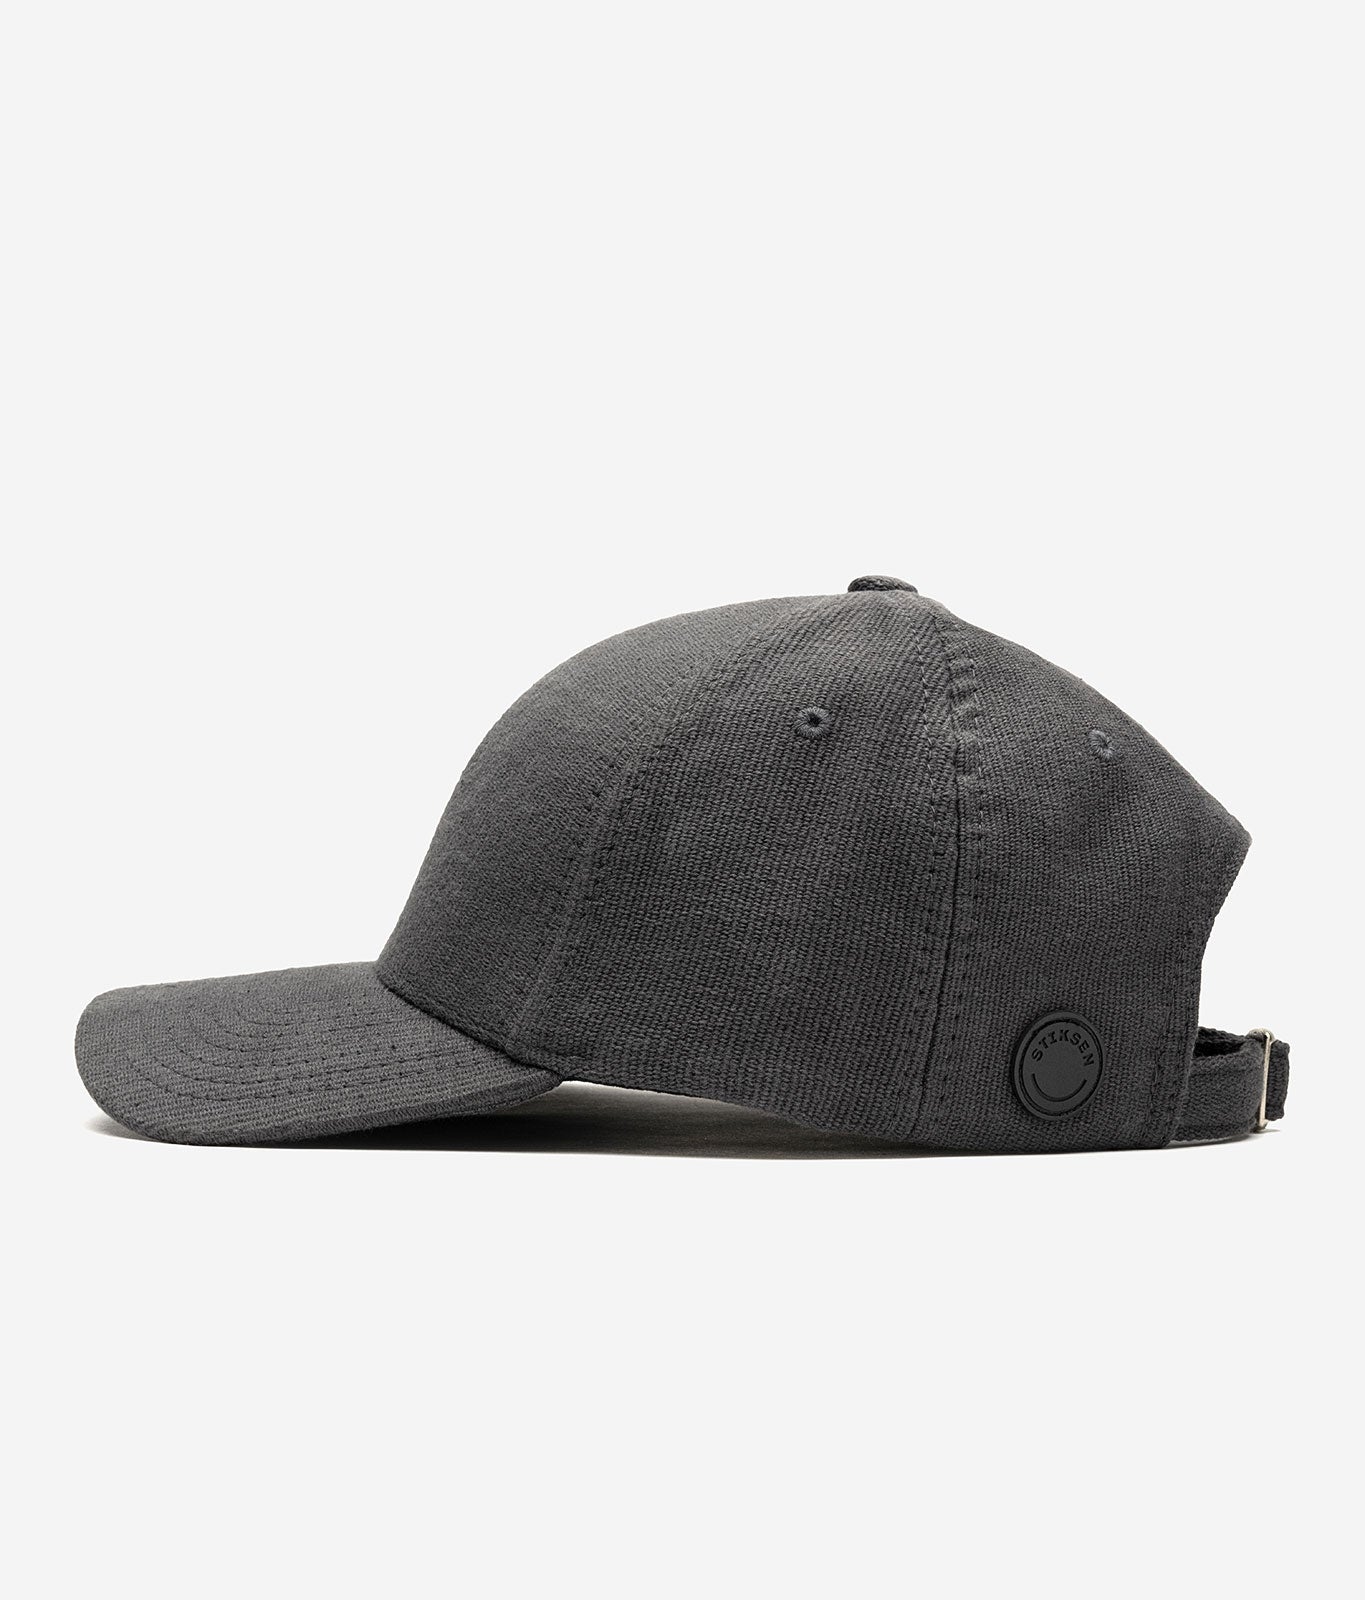 The Crown Baseball Hat - Black, HSFT Casual Cap